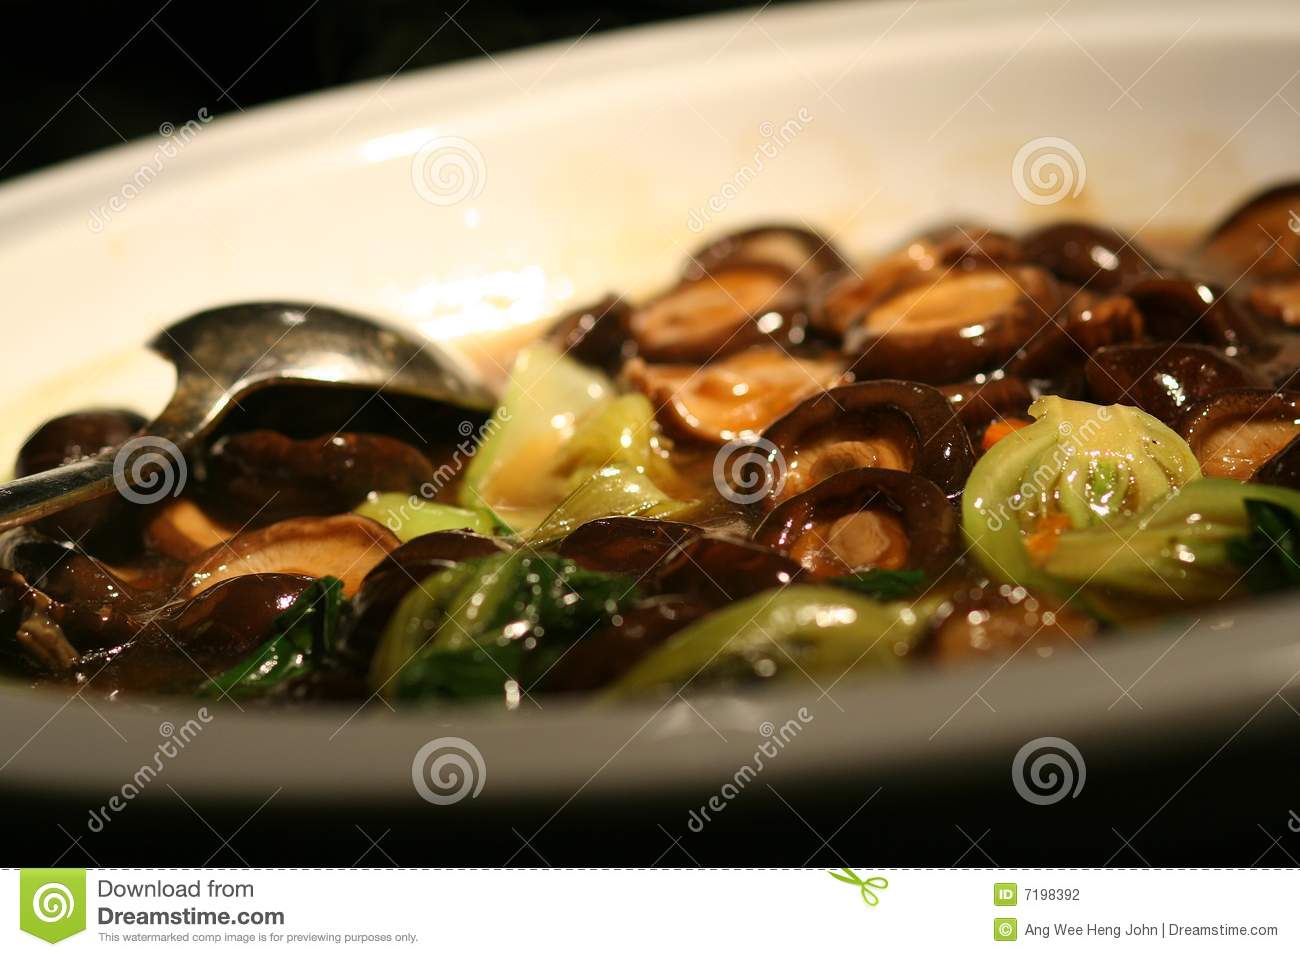 Cooked Mushrooms And Green Vegetables Stock Photography   Image    